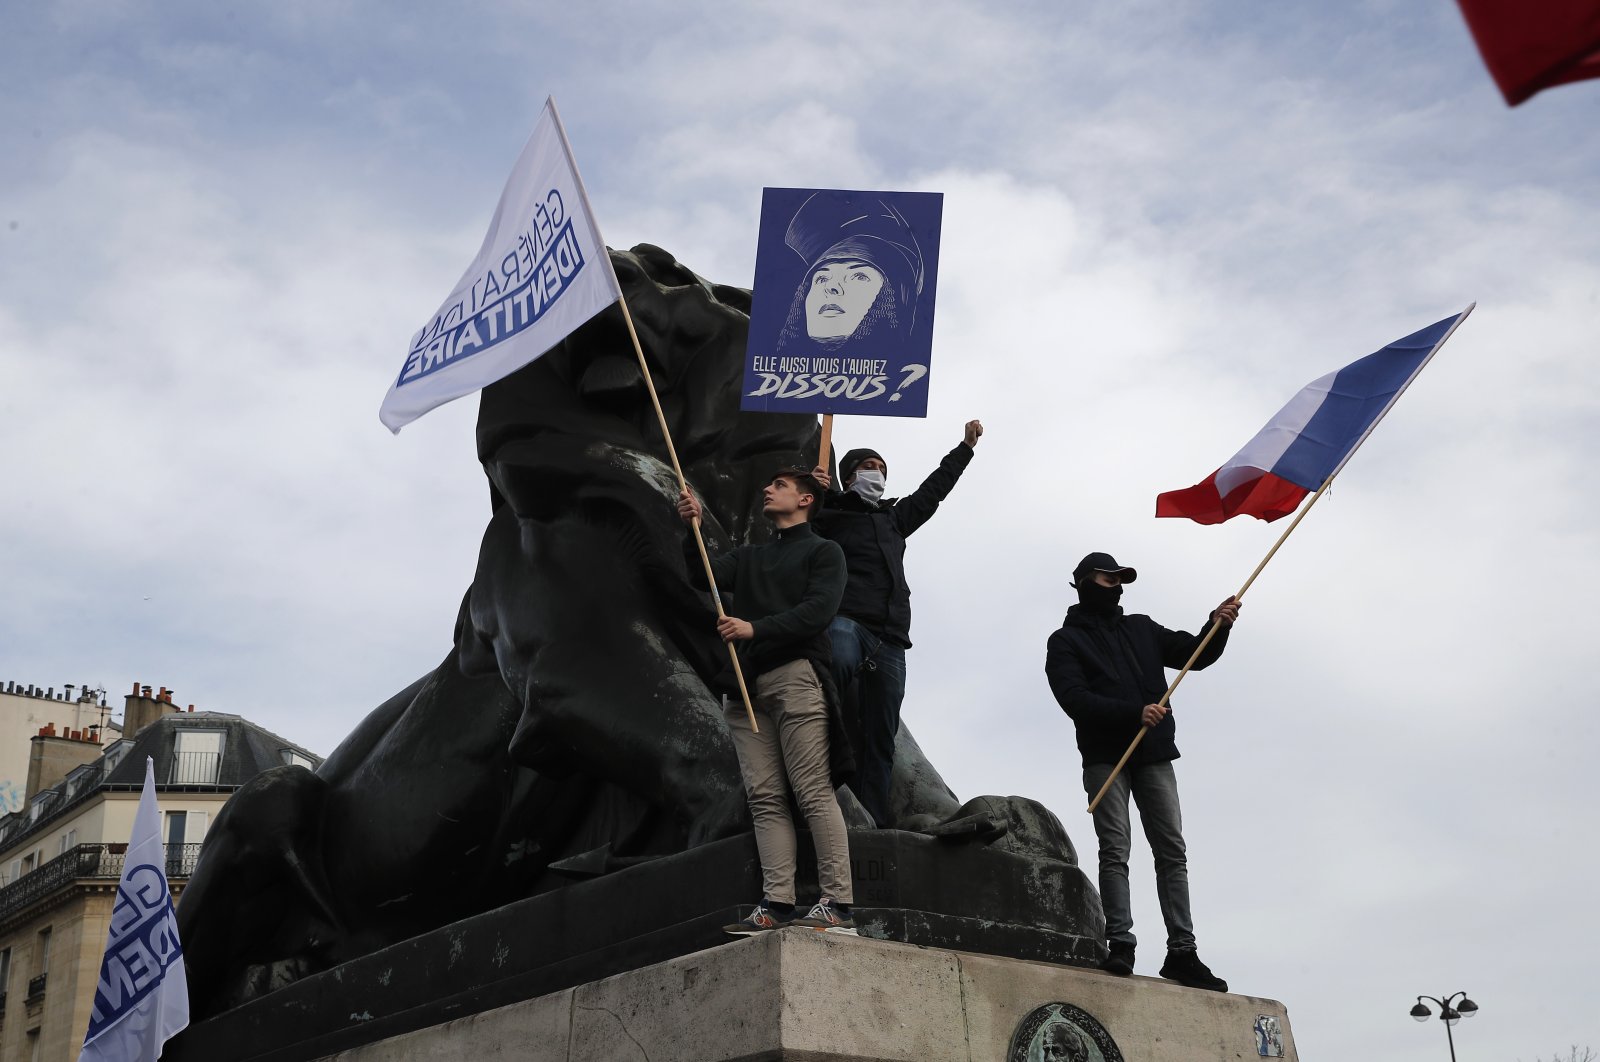 Supporters of the Generation Identity group wave flags while standing on a statue during a demonstration, Paris, France, Feb. 20, 2021. (AP Photo)